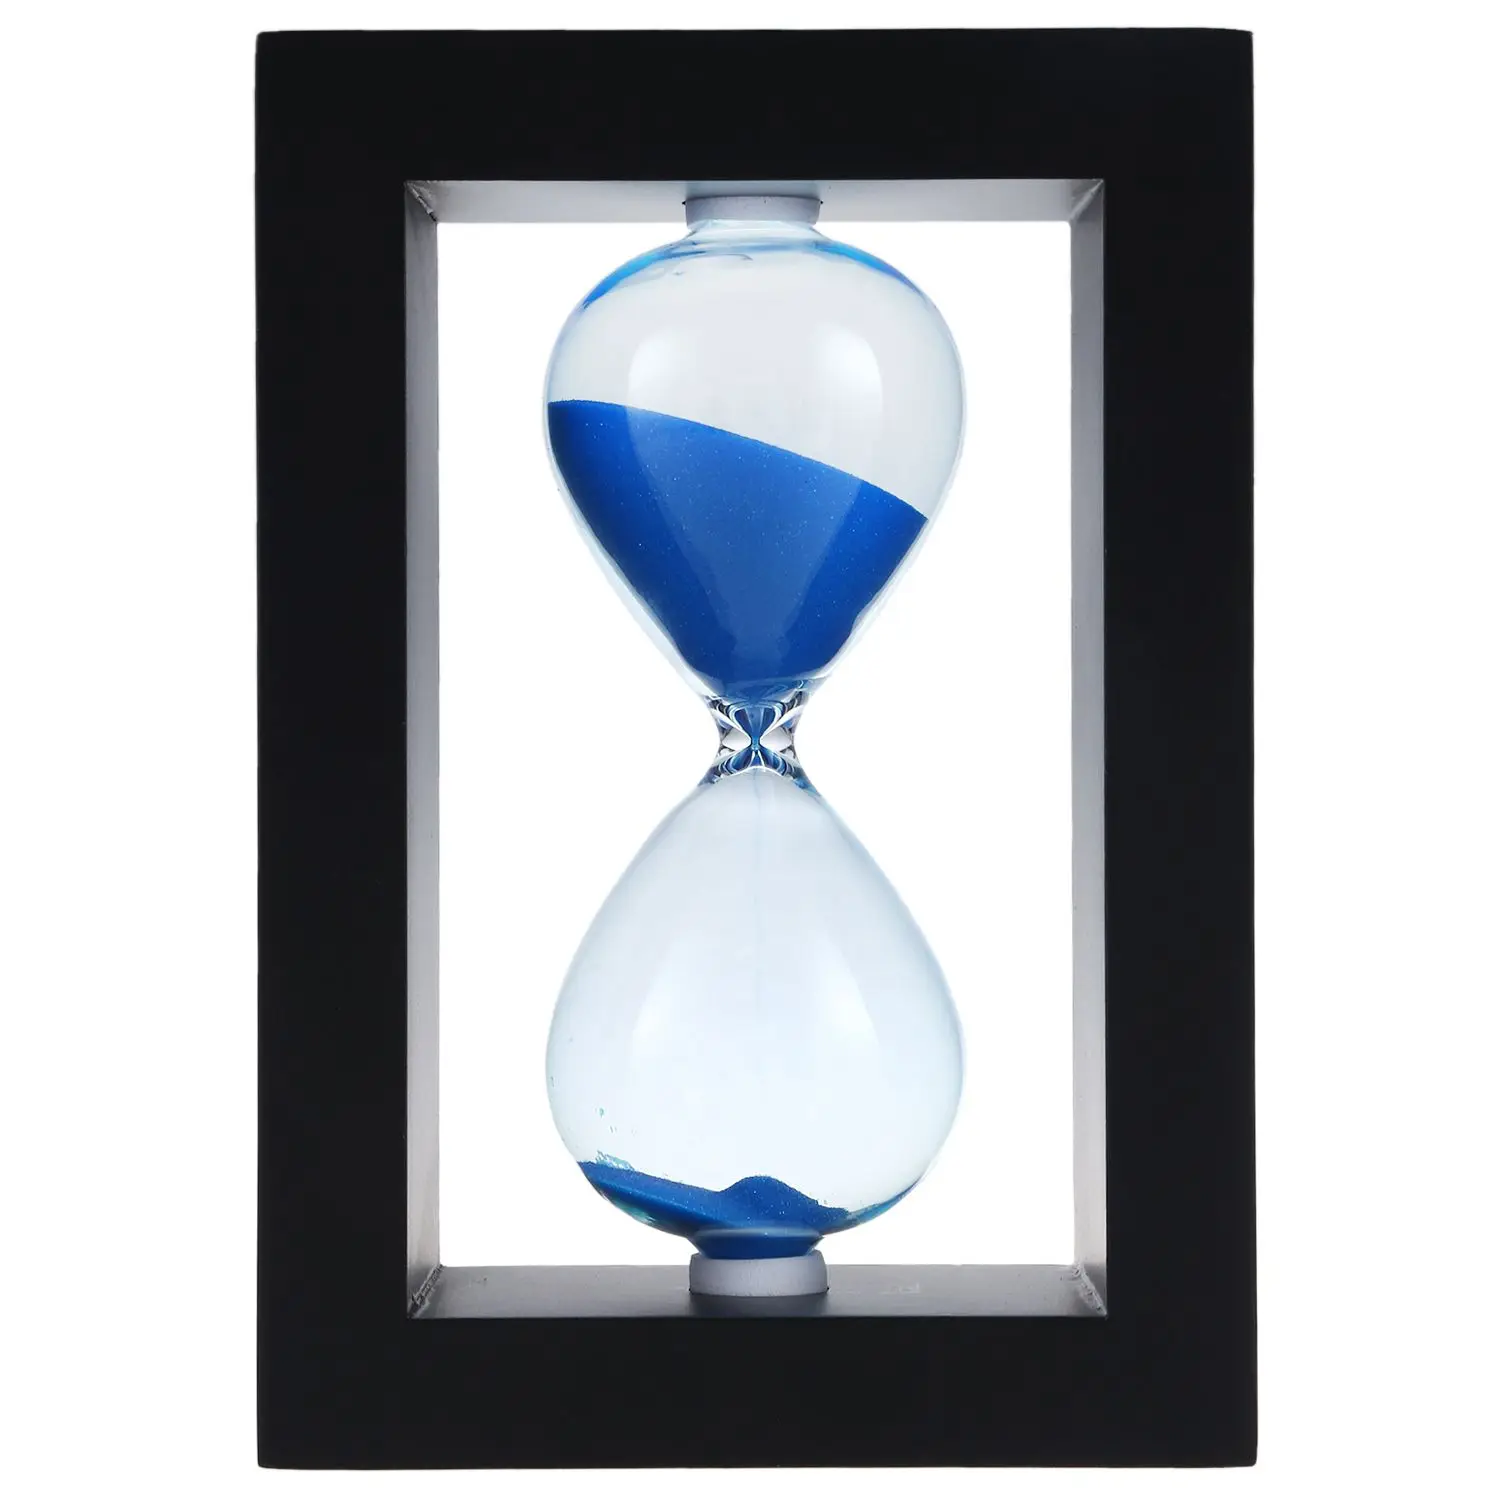 Hot Sale Wooden Frame Hourglass Sand Timer Black Frame Blue Sand.(Black Frame Blue